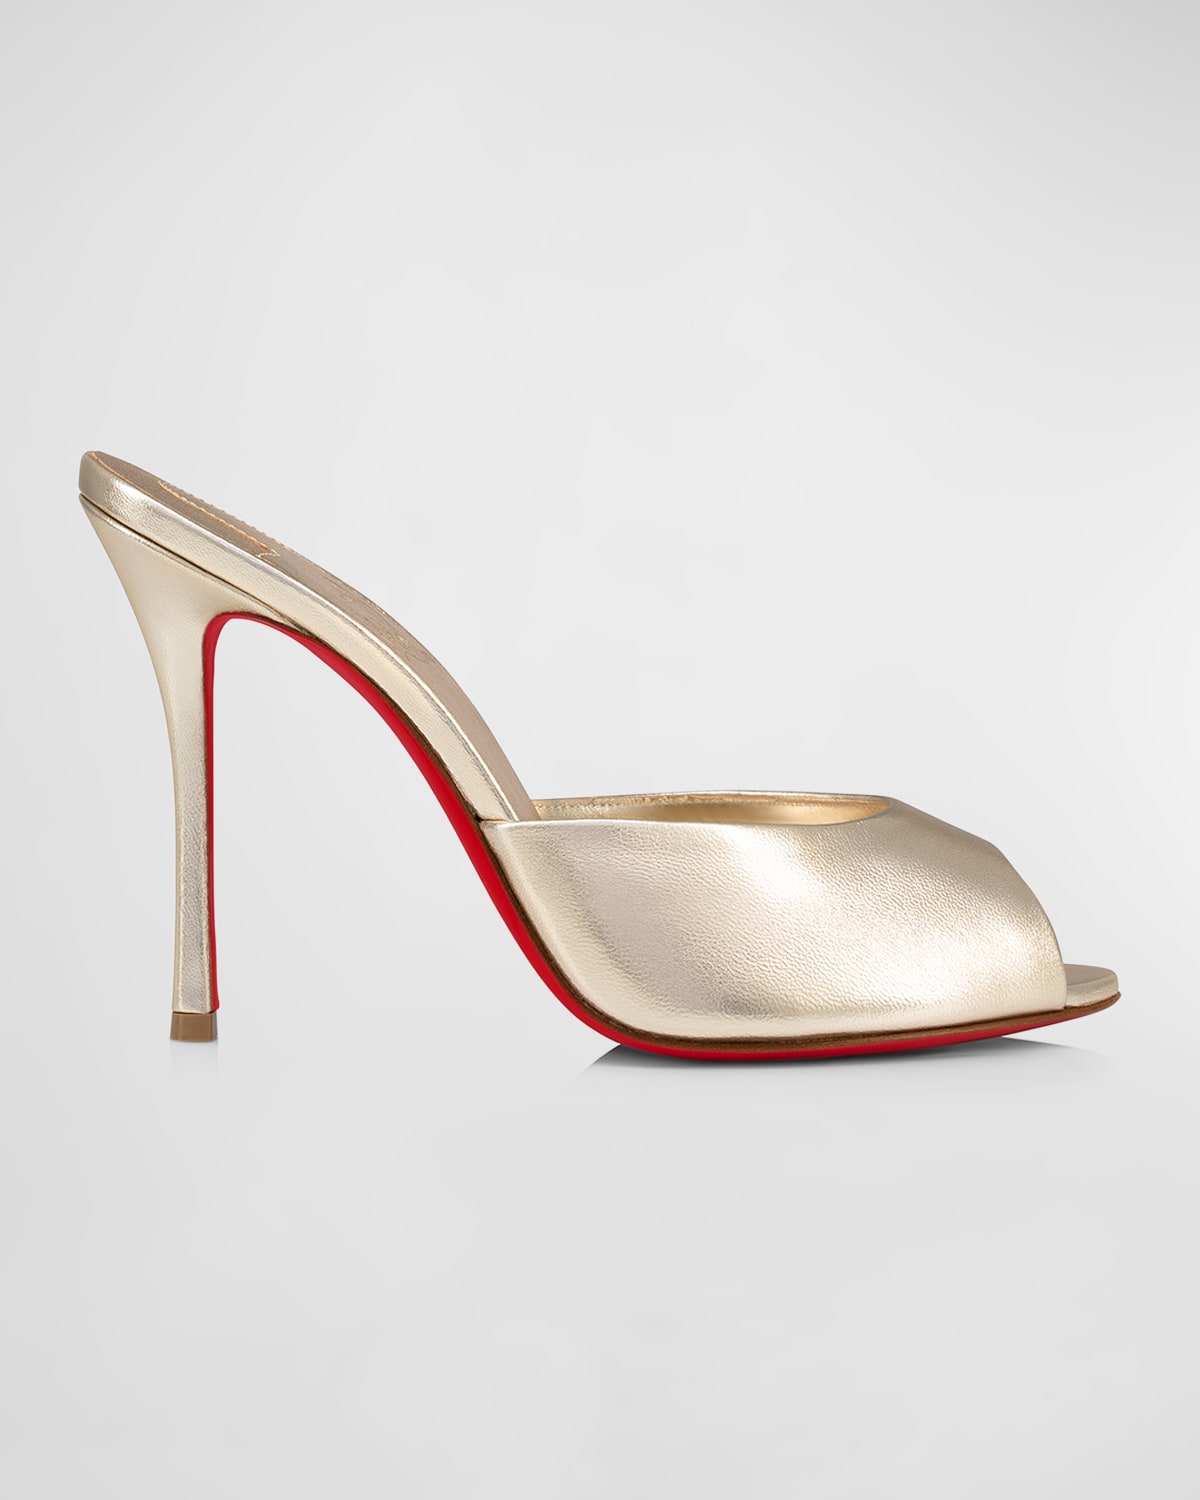 CHRISTIAN LOUBOUTIN ME DOLLY METALLIC RED SOLE SLIDE SANDALS